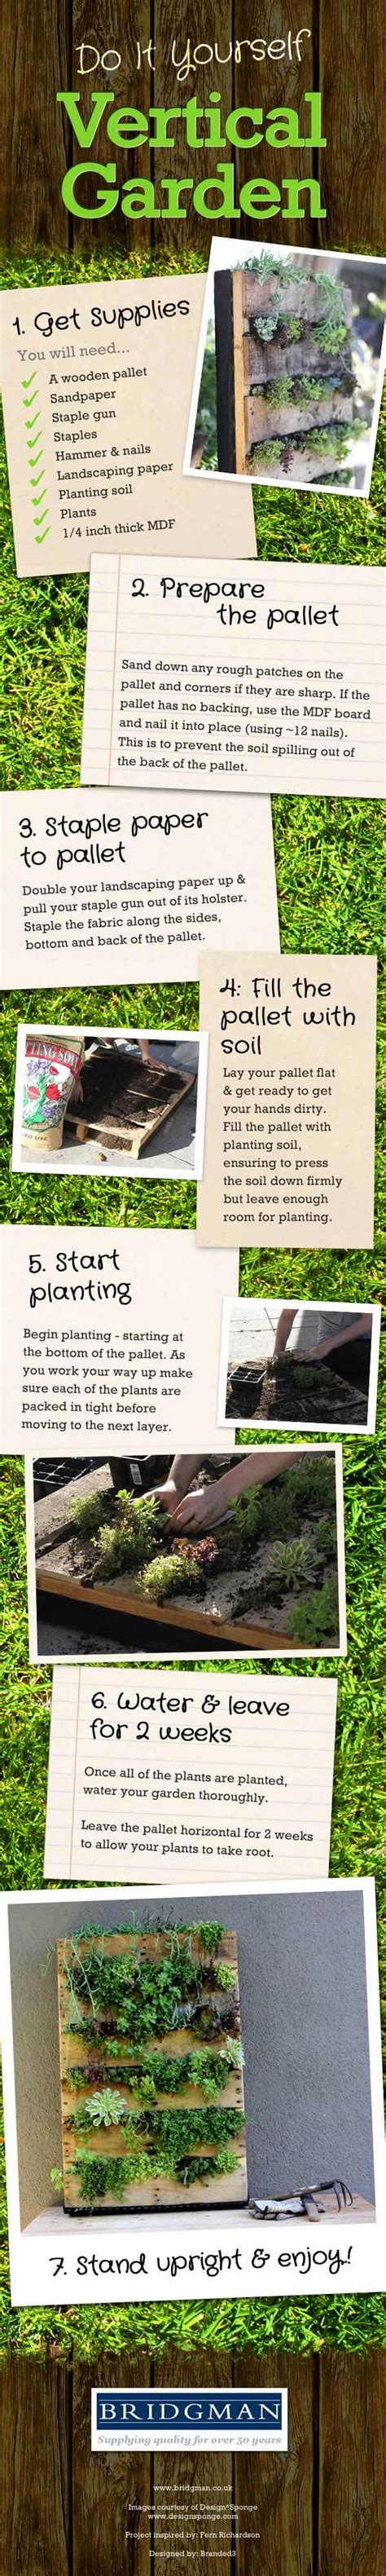 With this said, here is what you need to know to grow your own vertical garden: DIY Gardening: How to create a Vertical Wall Garden ...